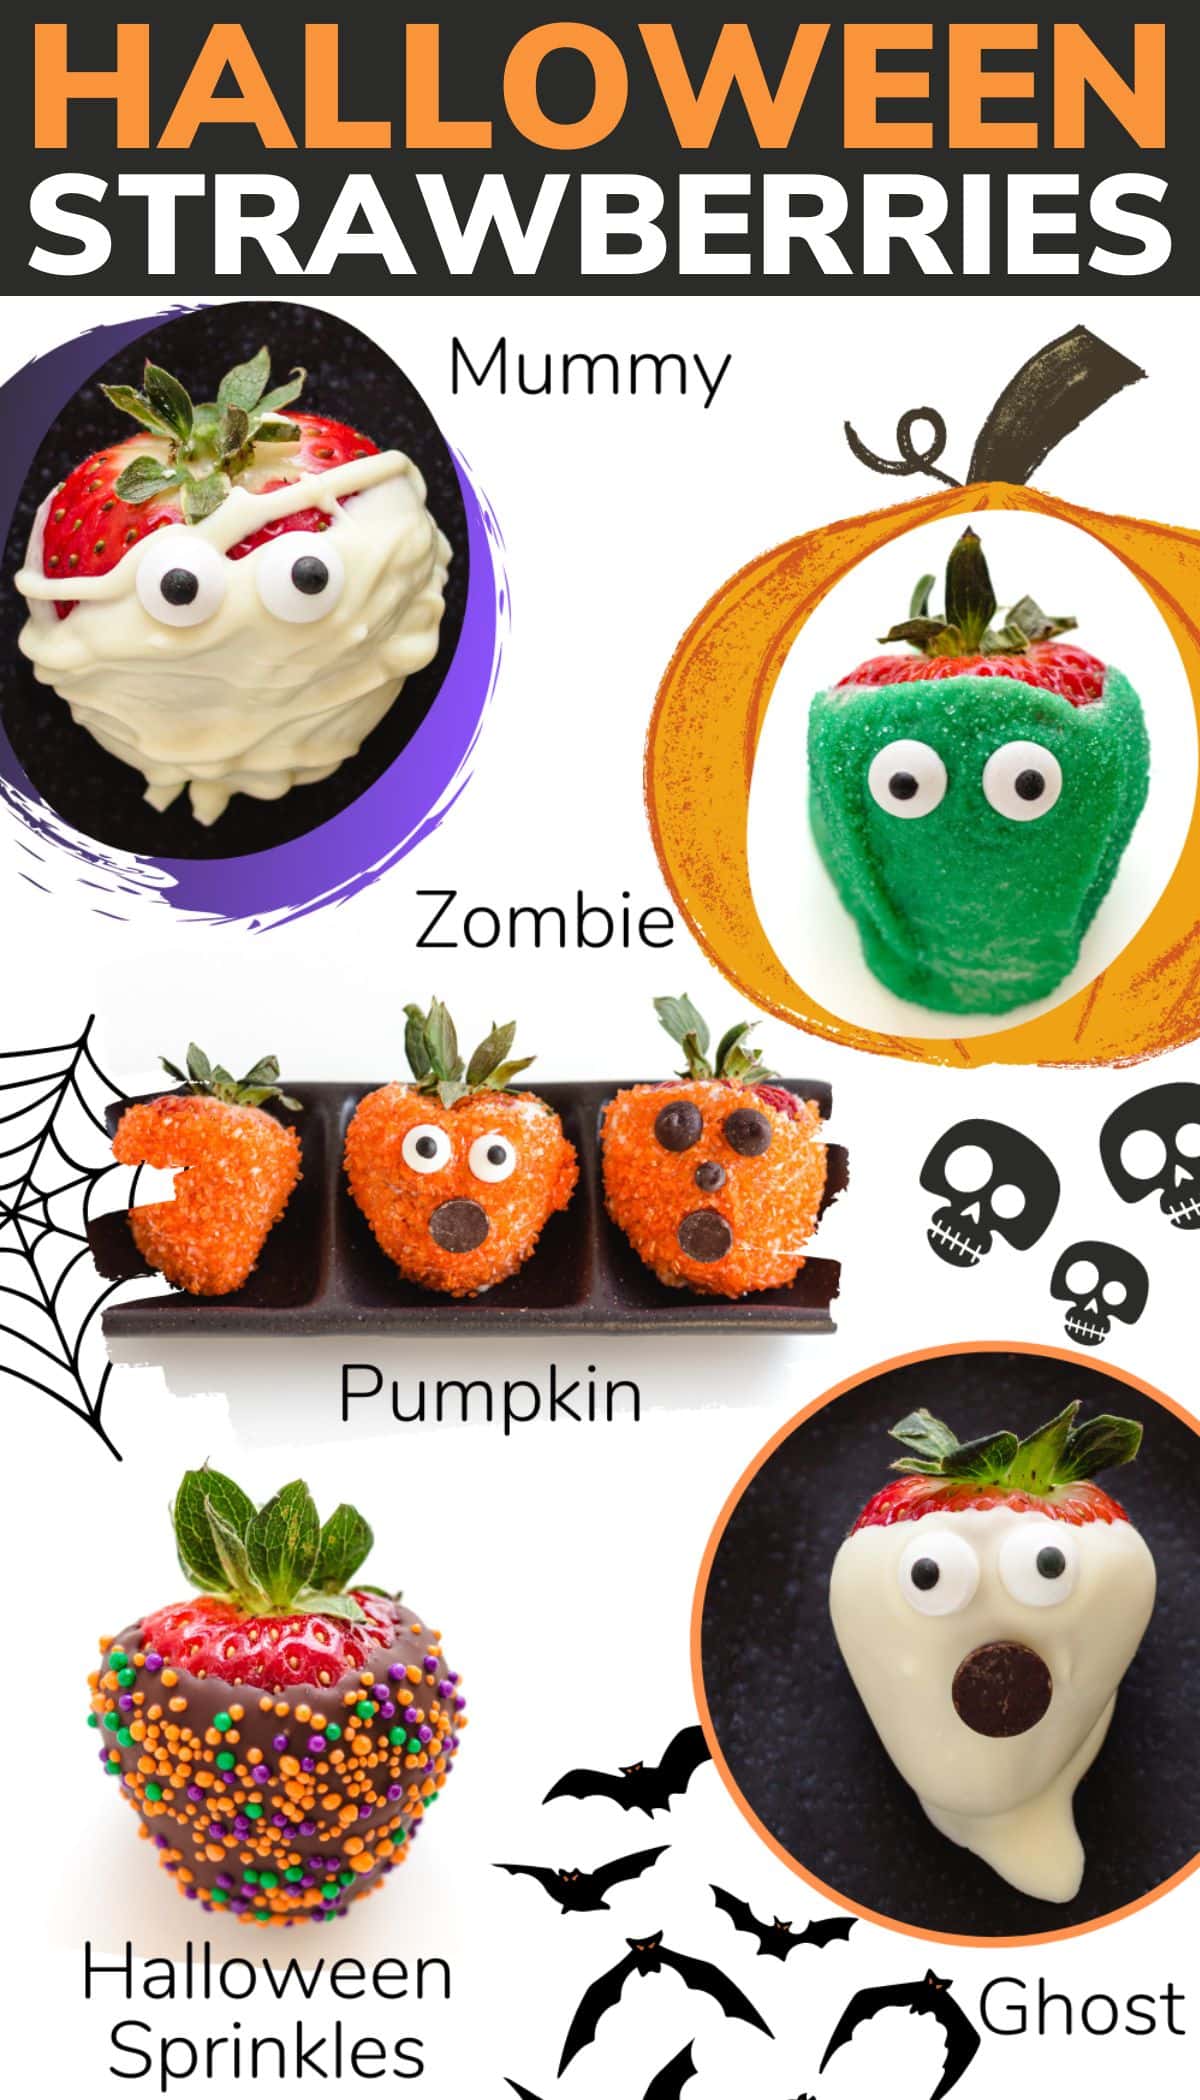 Labelled graphic showing 5 different types of Halloween strawberries.